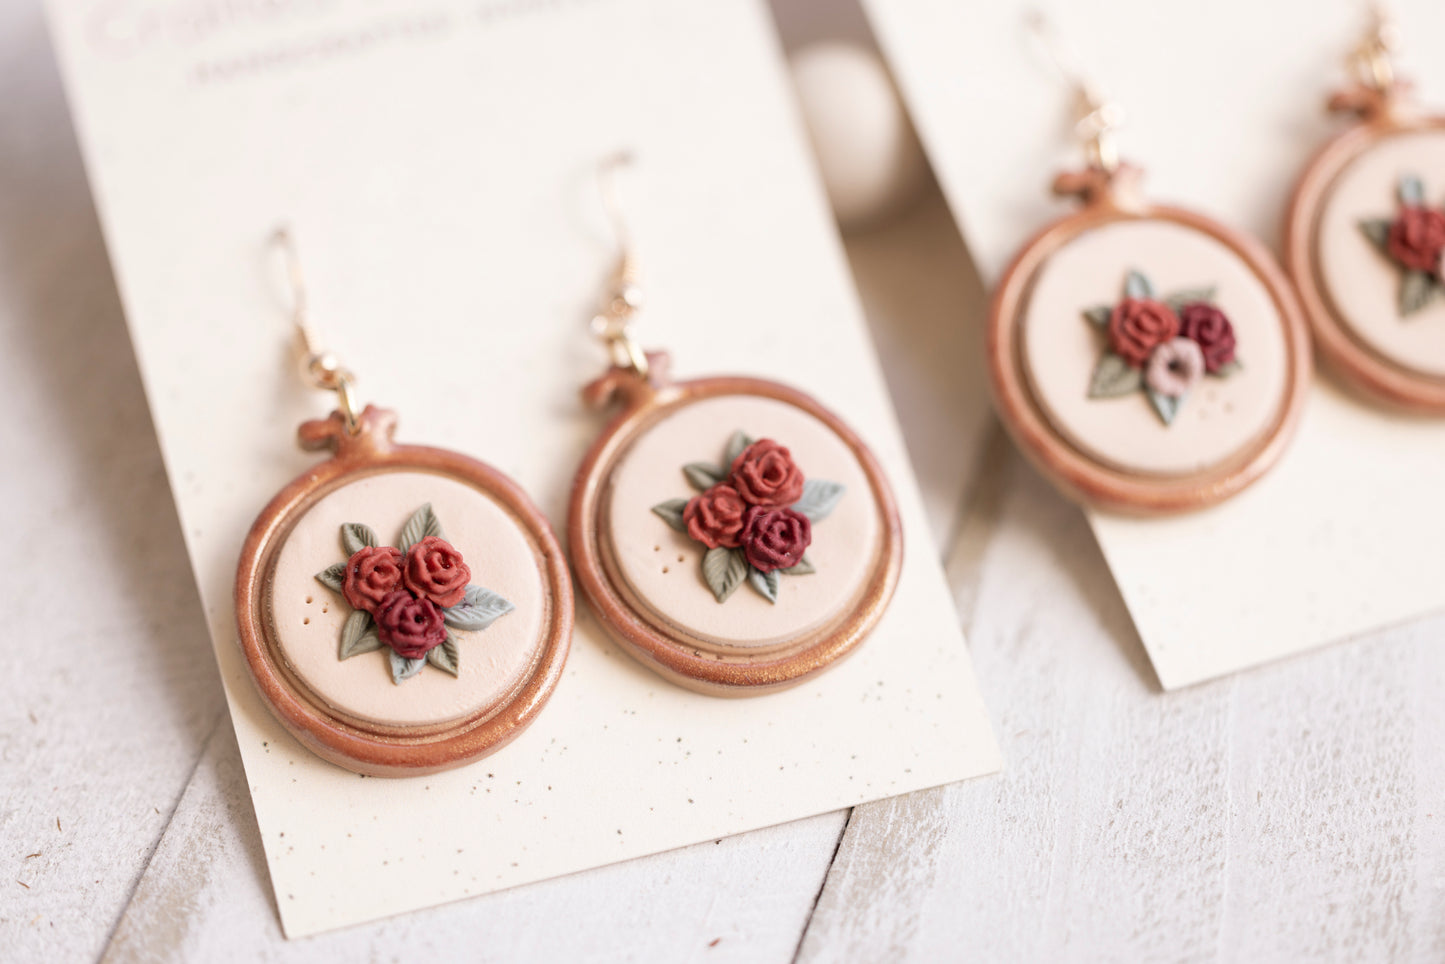 Embroidery Hoop Floral Dangle